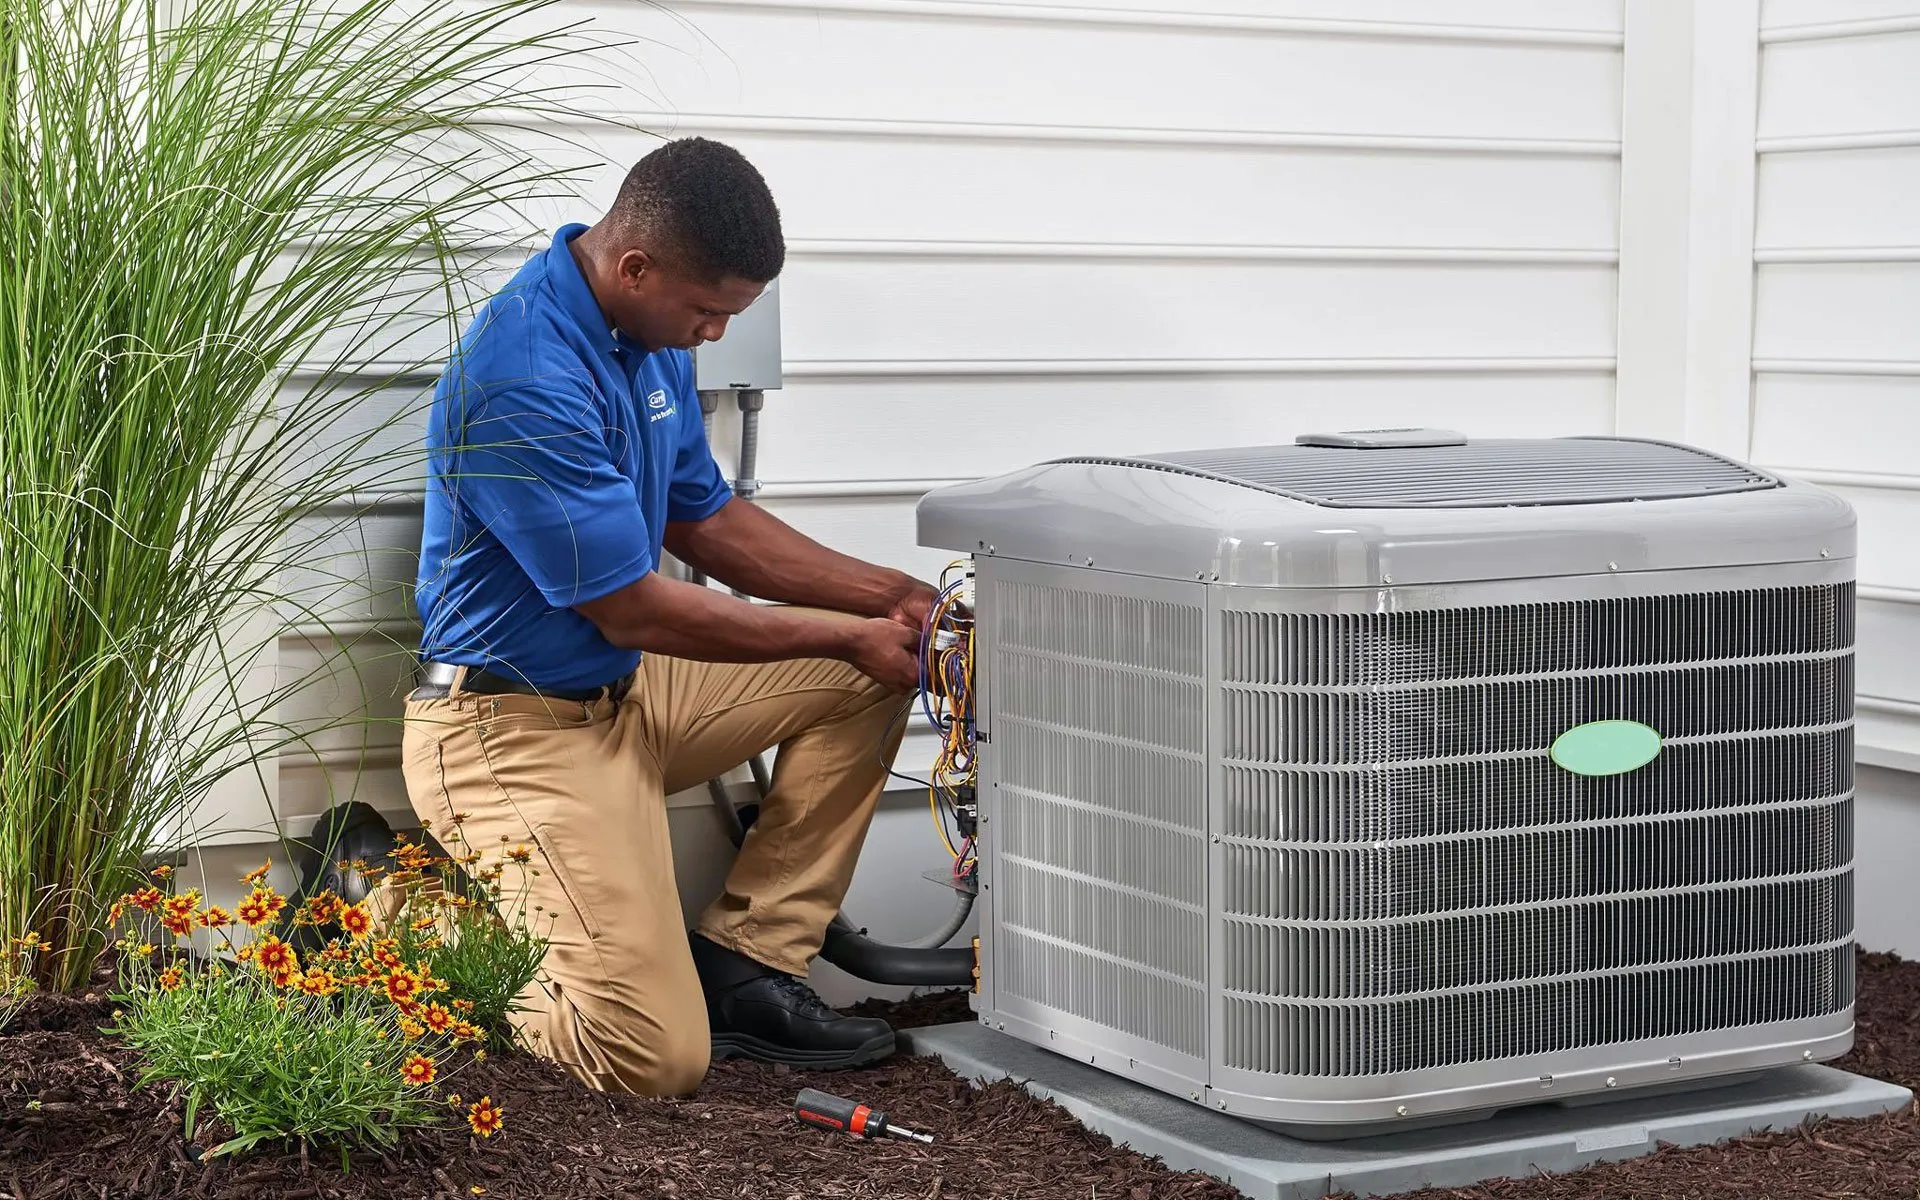 Skilled technician servicing an air conditioning unit, checking wiring and components for optimal functionality and to prevent AC breakdowns and prepare your HVAC system for weather conditions.